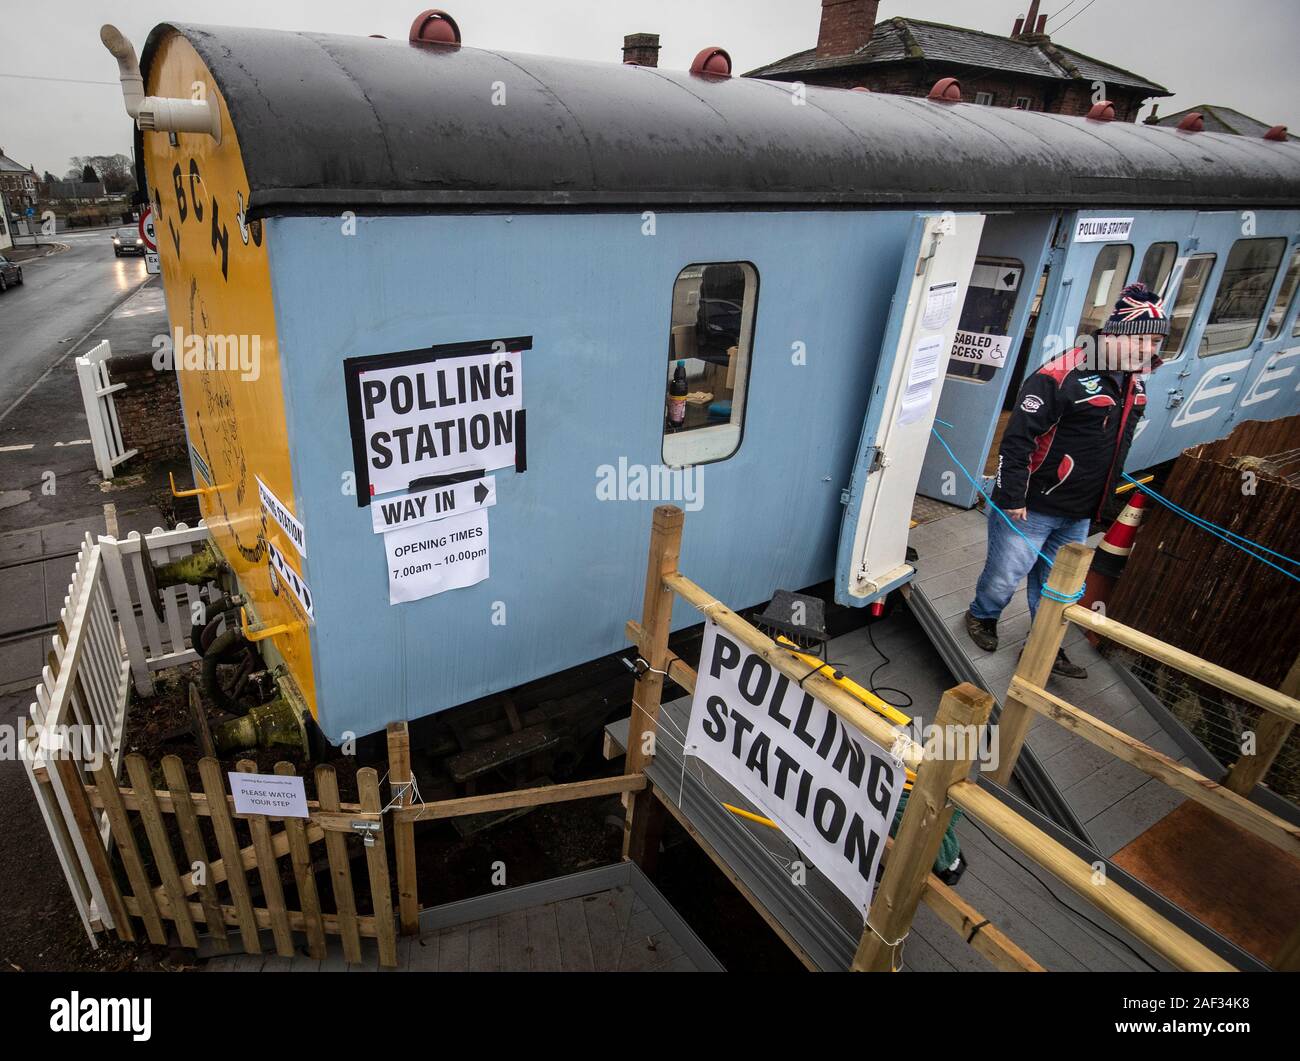 A man leaves a polling station in a railway carriage in Leeming Bar, North Yorkshire, as voters go to the polls in what has been billed as the most important General Election in a generation. Stock Photo